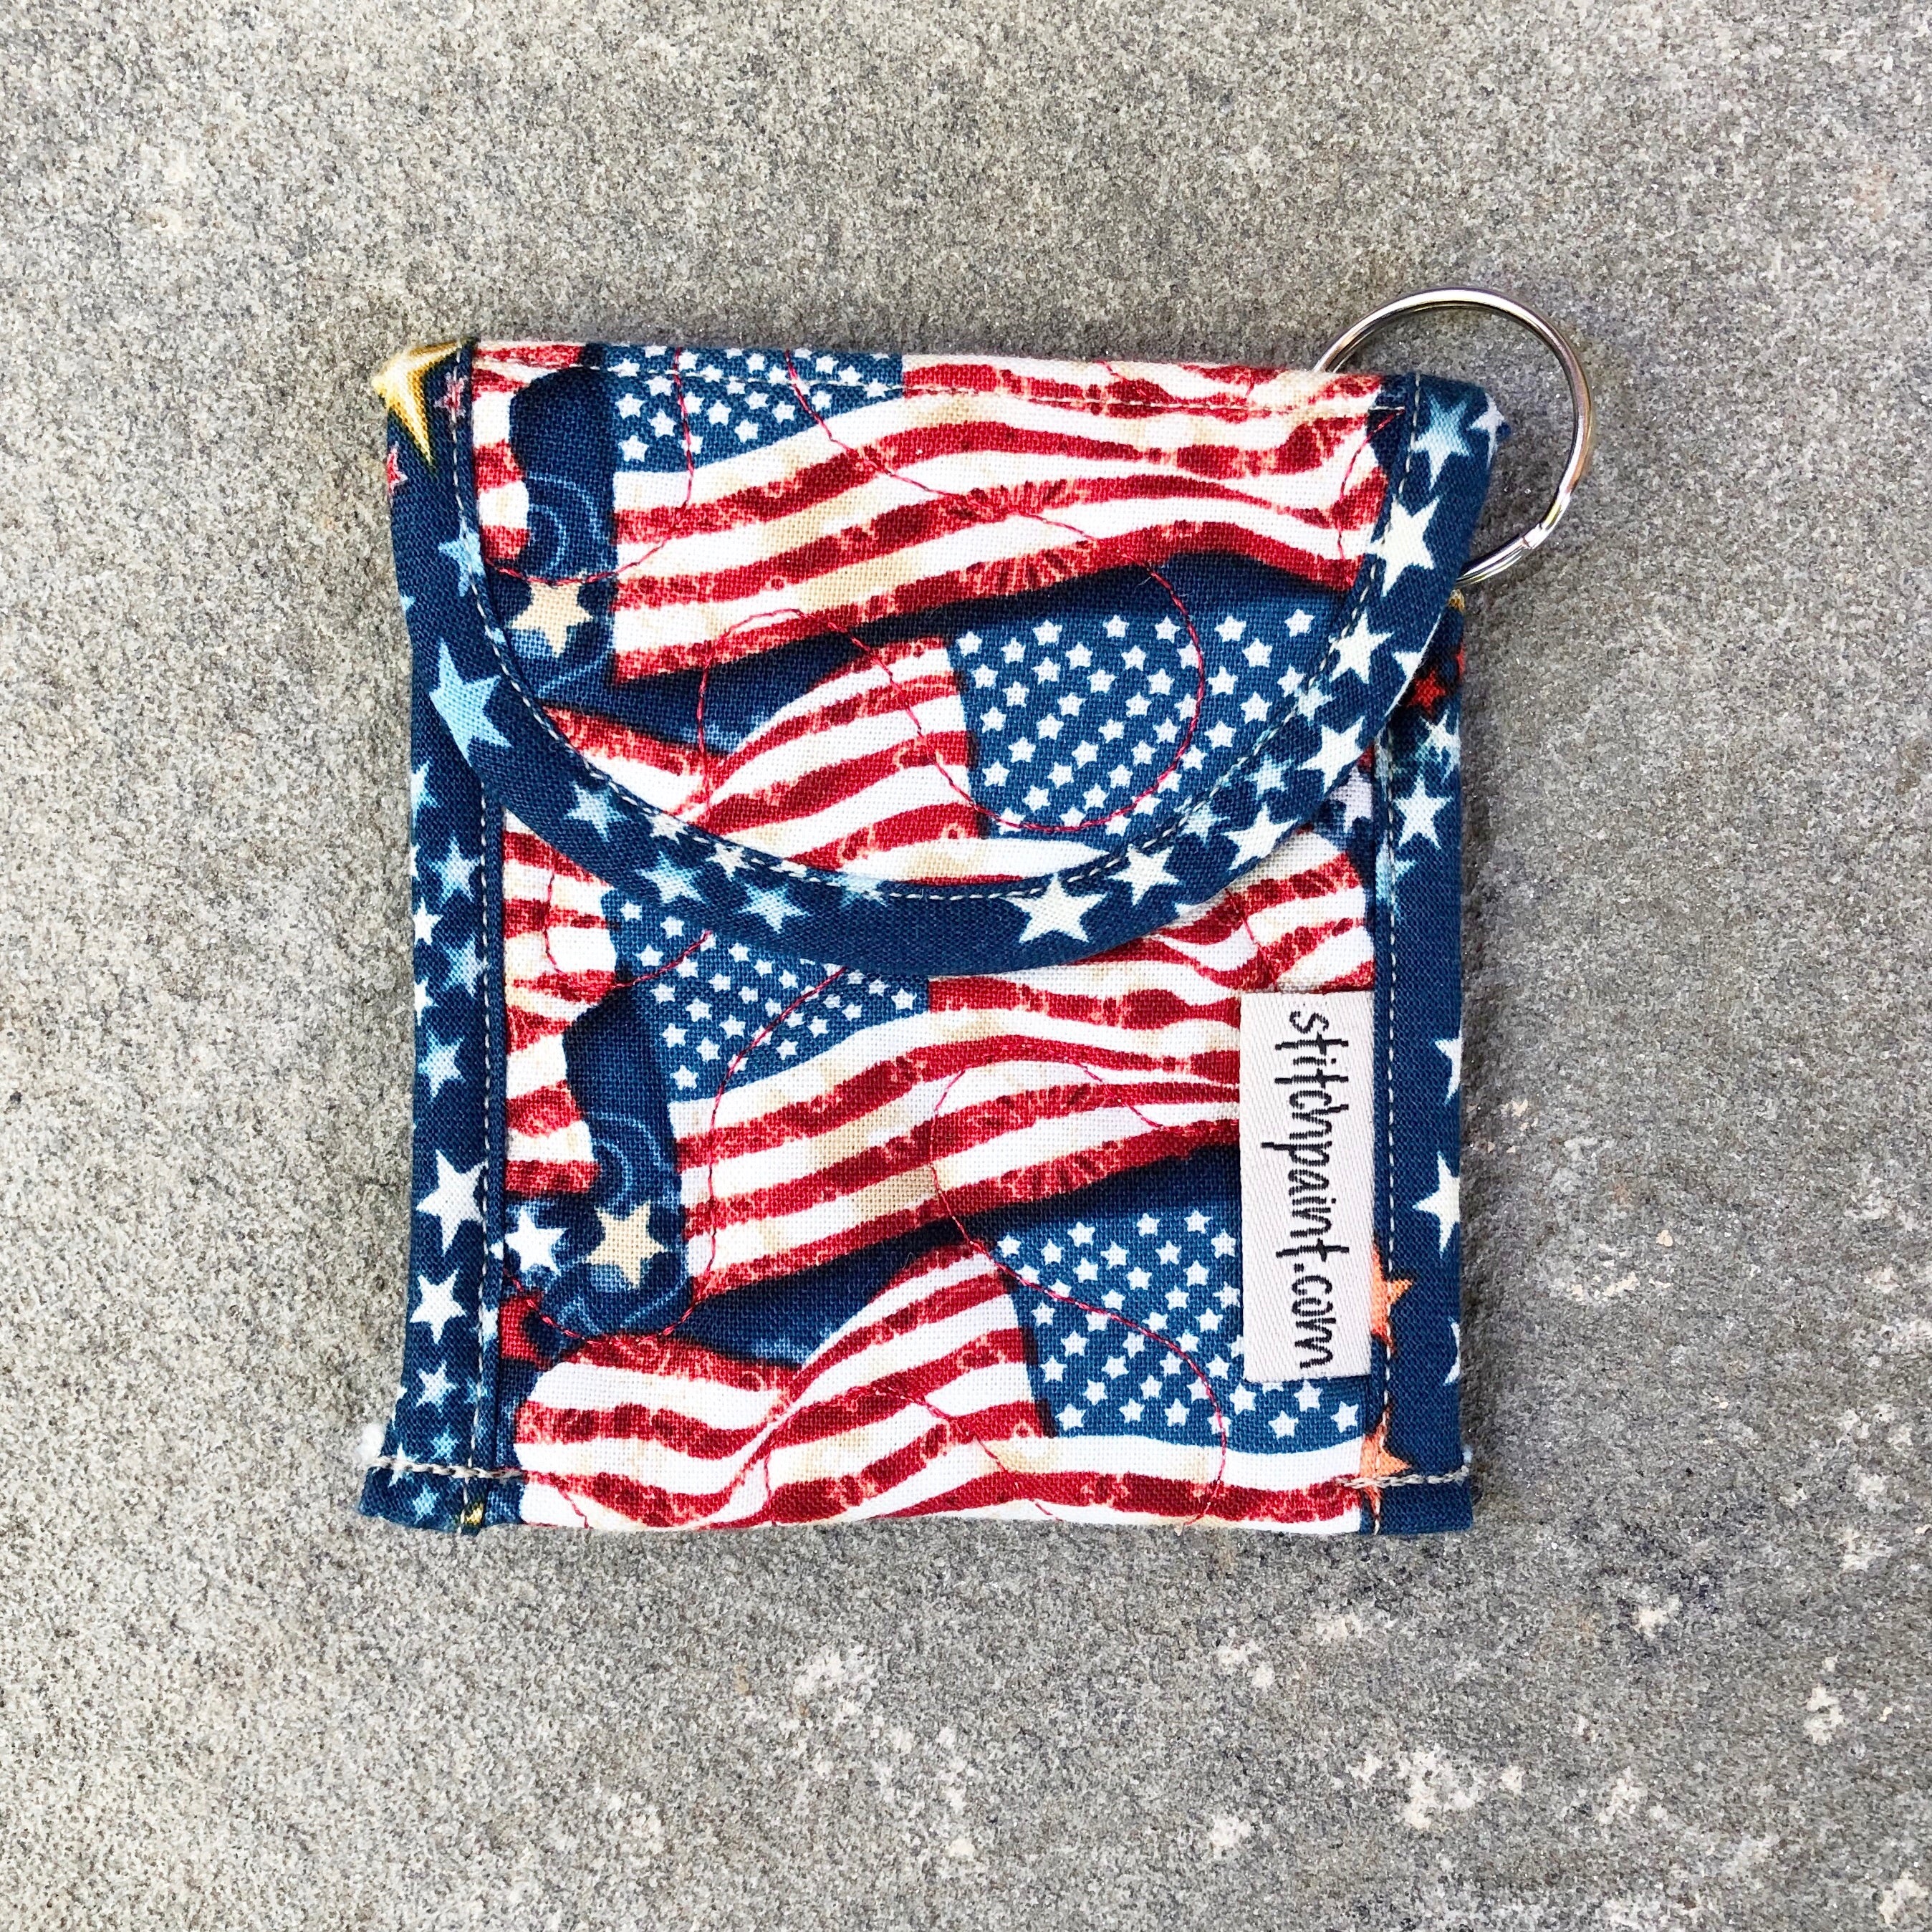 Credit Card Fob | Keychain Card Wallet | Stitchpaint | American Flag